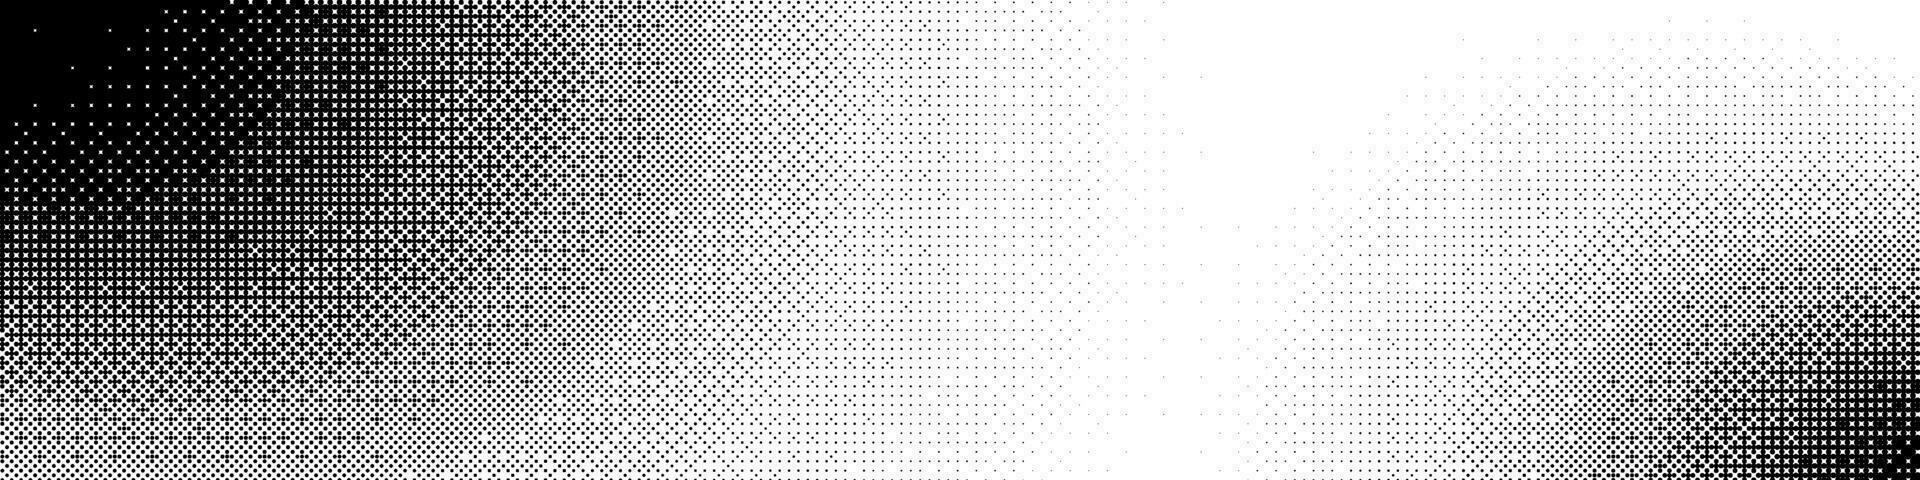 Halftone pattern background with gradient transition, comic-style dots and pixelated squares. Texture grain, grit, and old grunge noise elements. Flat vector illustration isolated on white background.